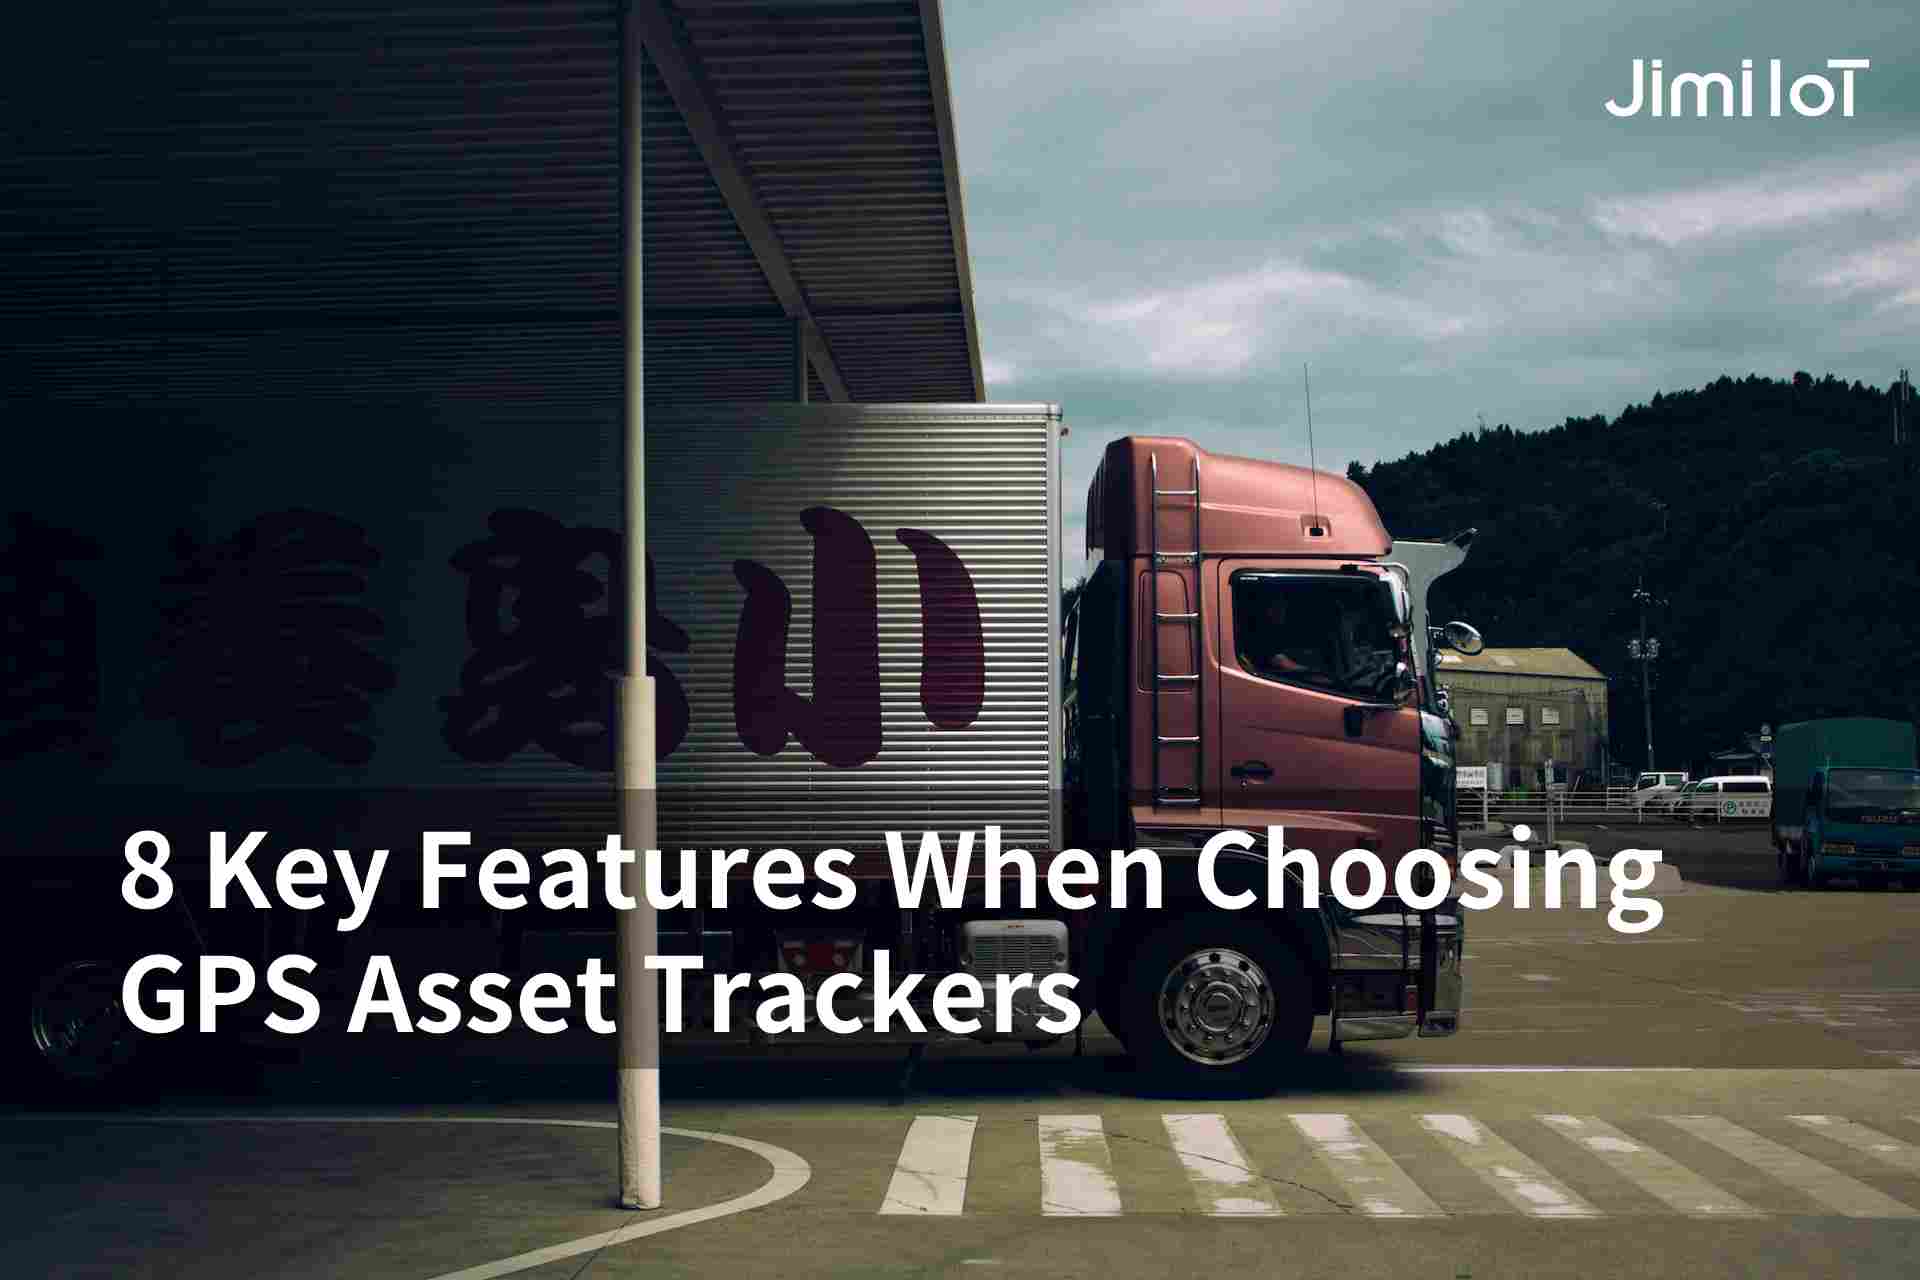 8 Key Features When Choosing GPS Asset Trackers